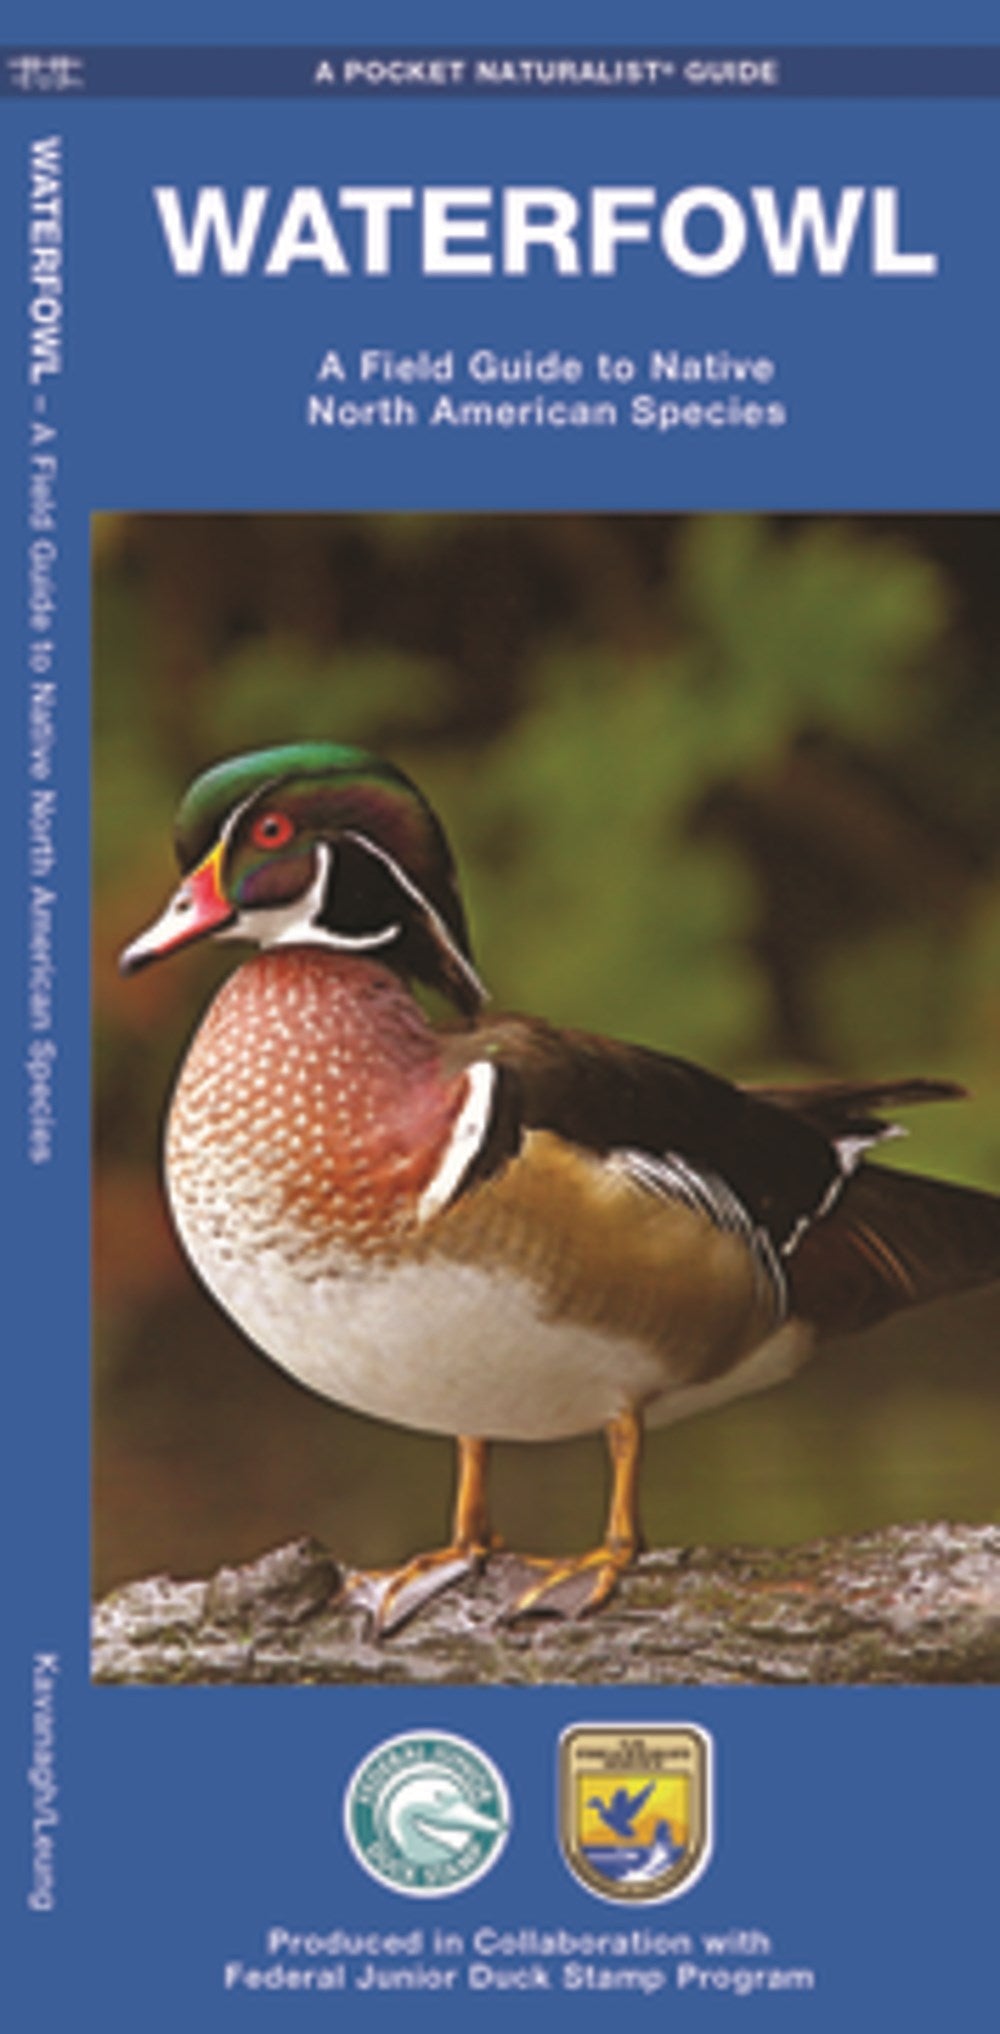 Waterfowl: A Field Guide to Native North American Species (2nd Edition)